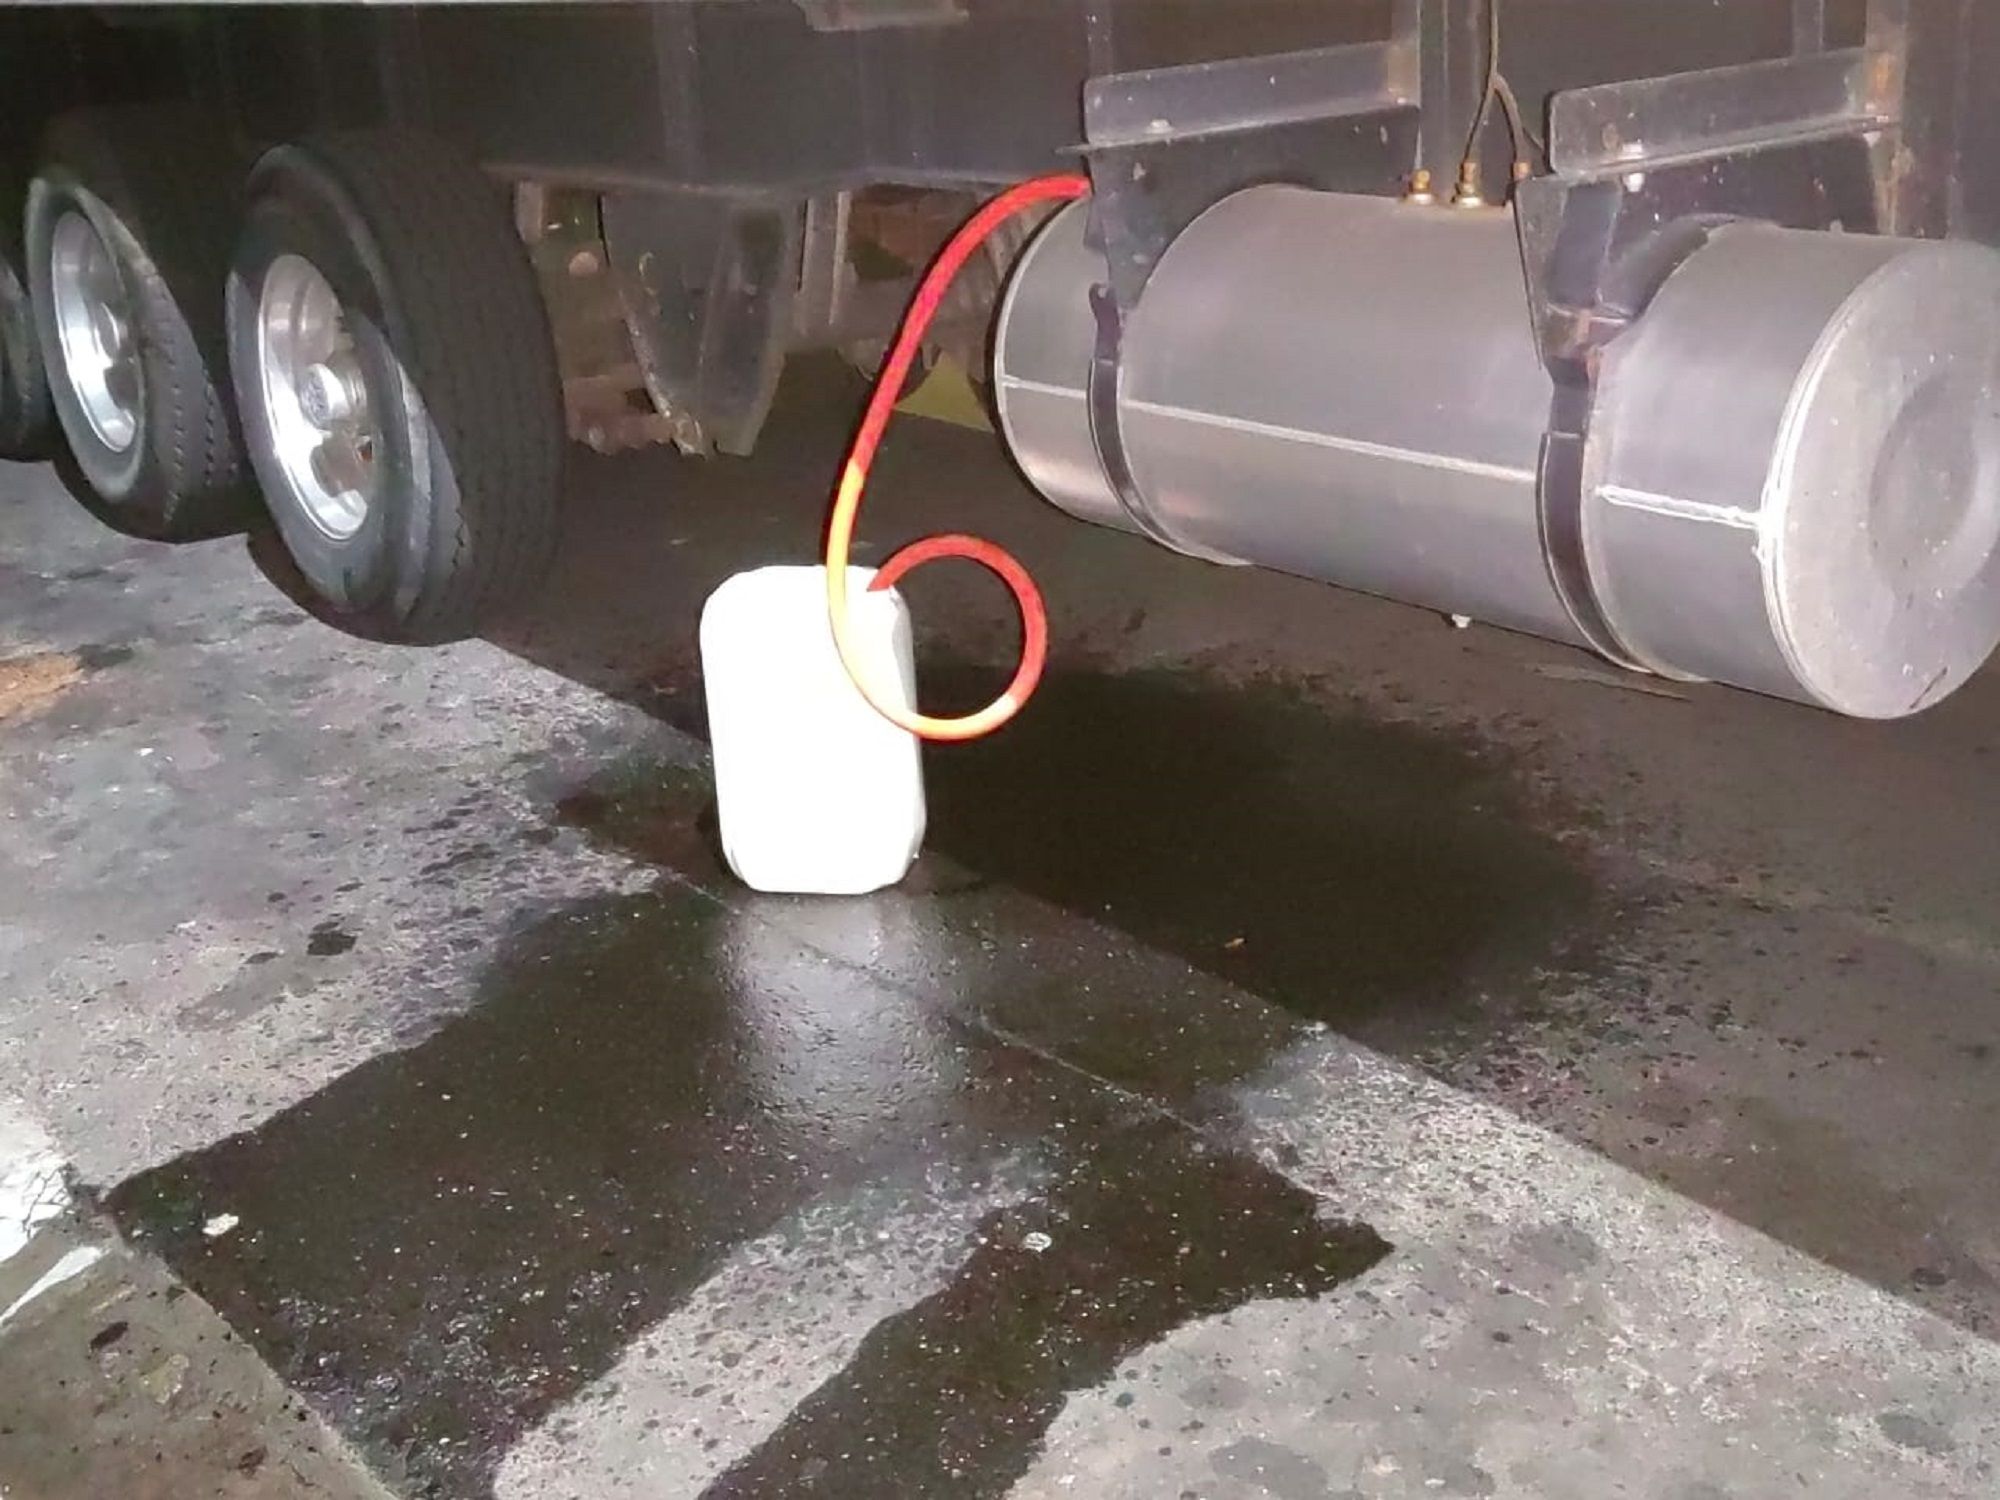 Four suspects arrested in Parow after they were caught siphoning diesel from a parked truck